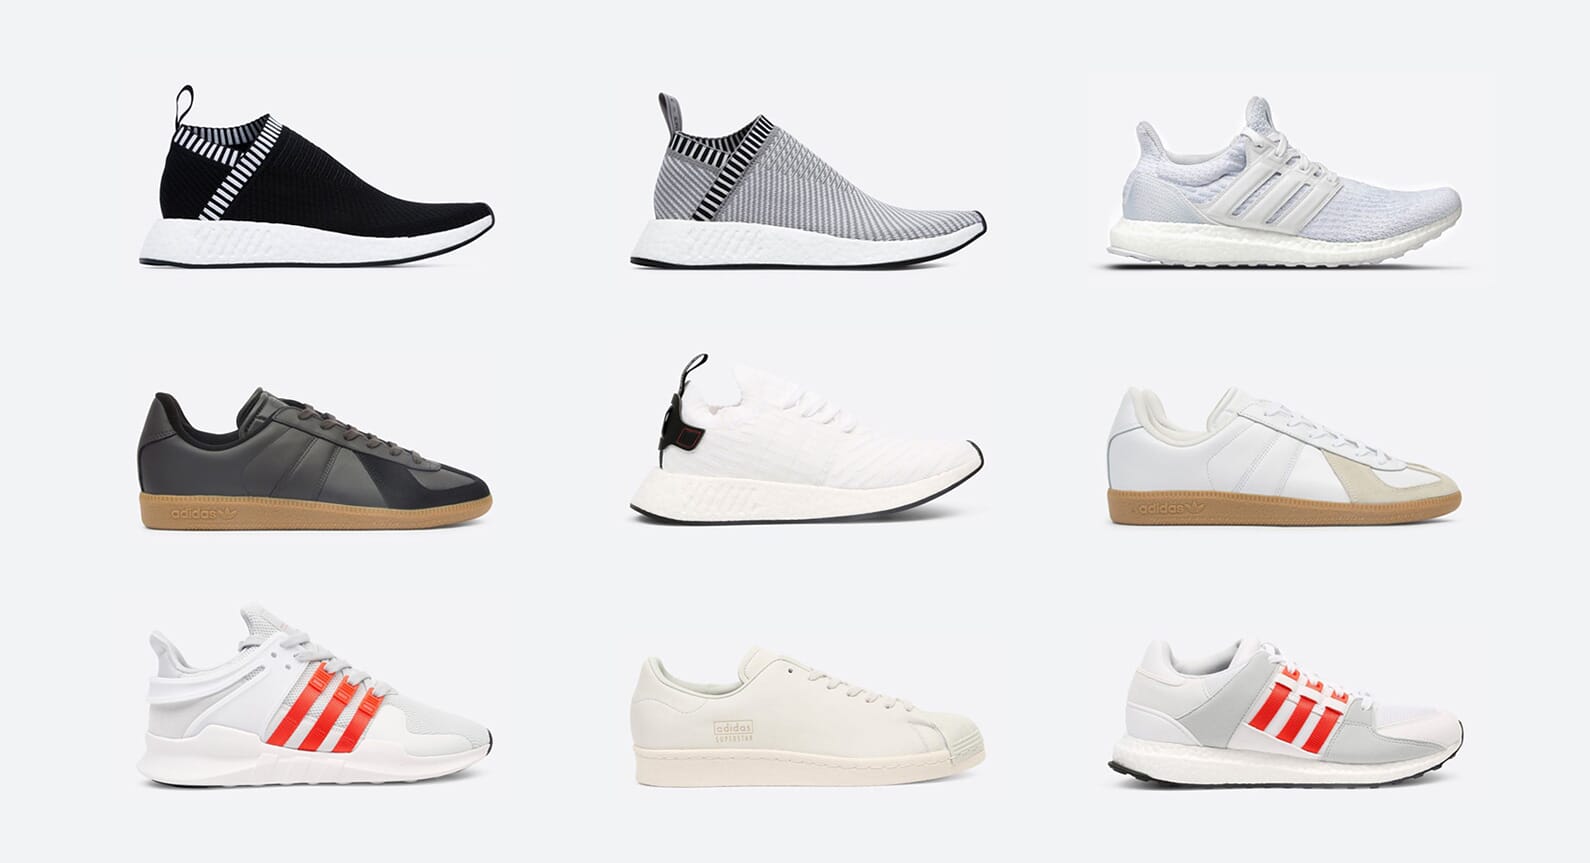 This Month’s New Sneaker Releases From Adidas